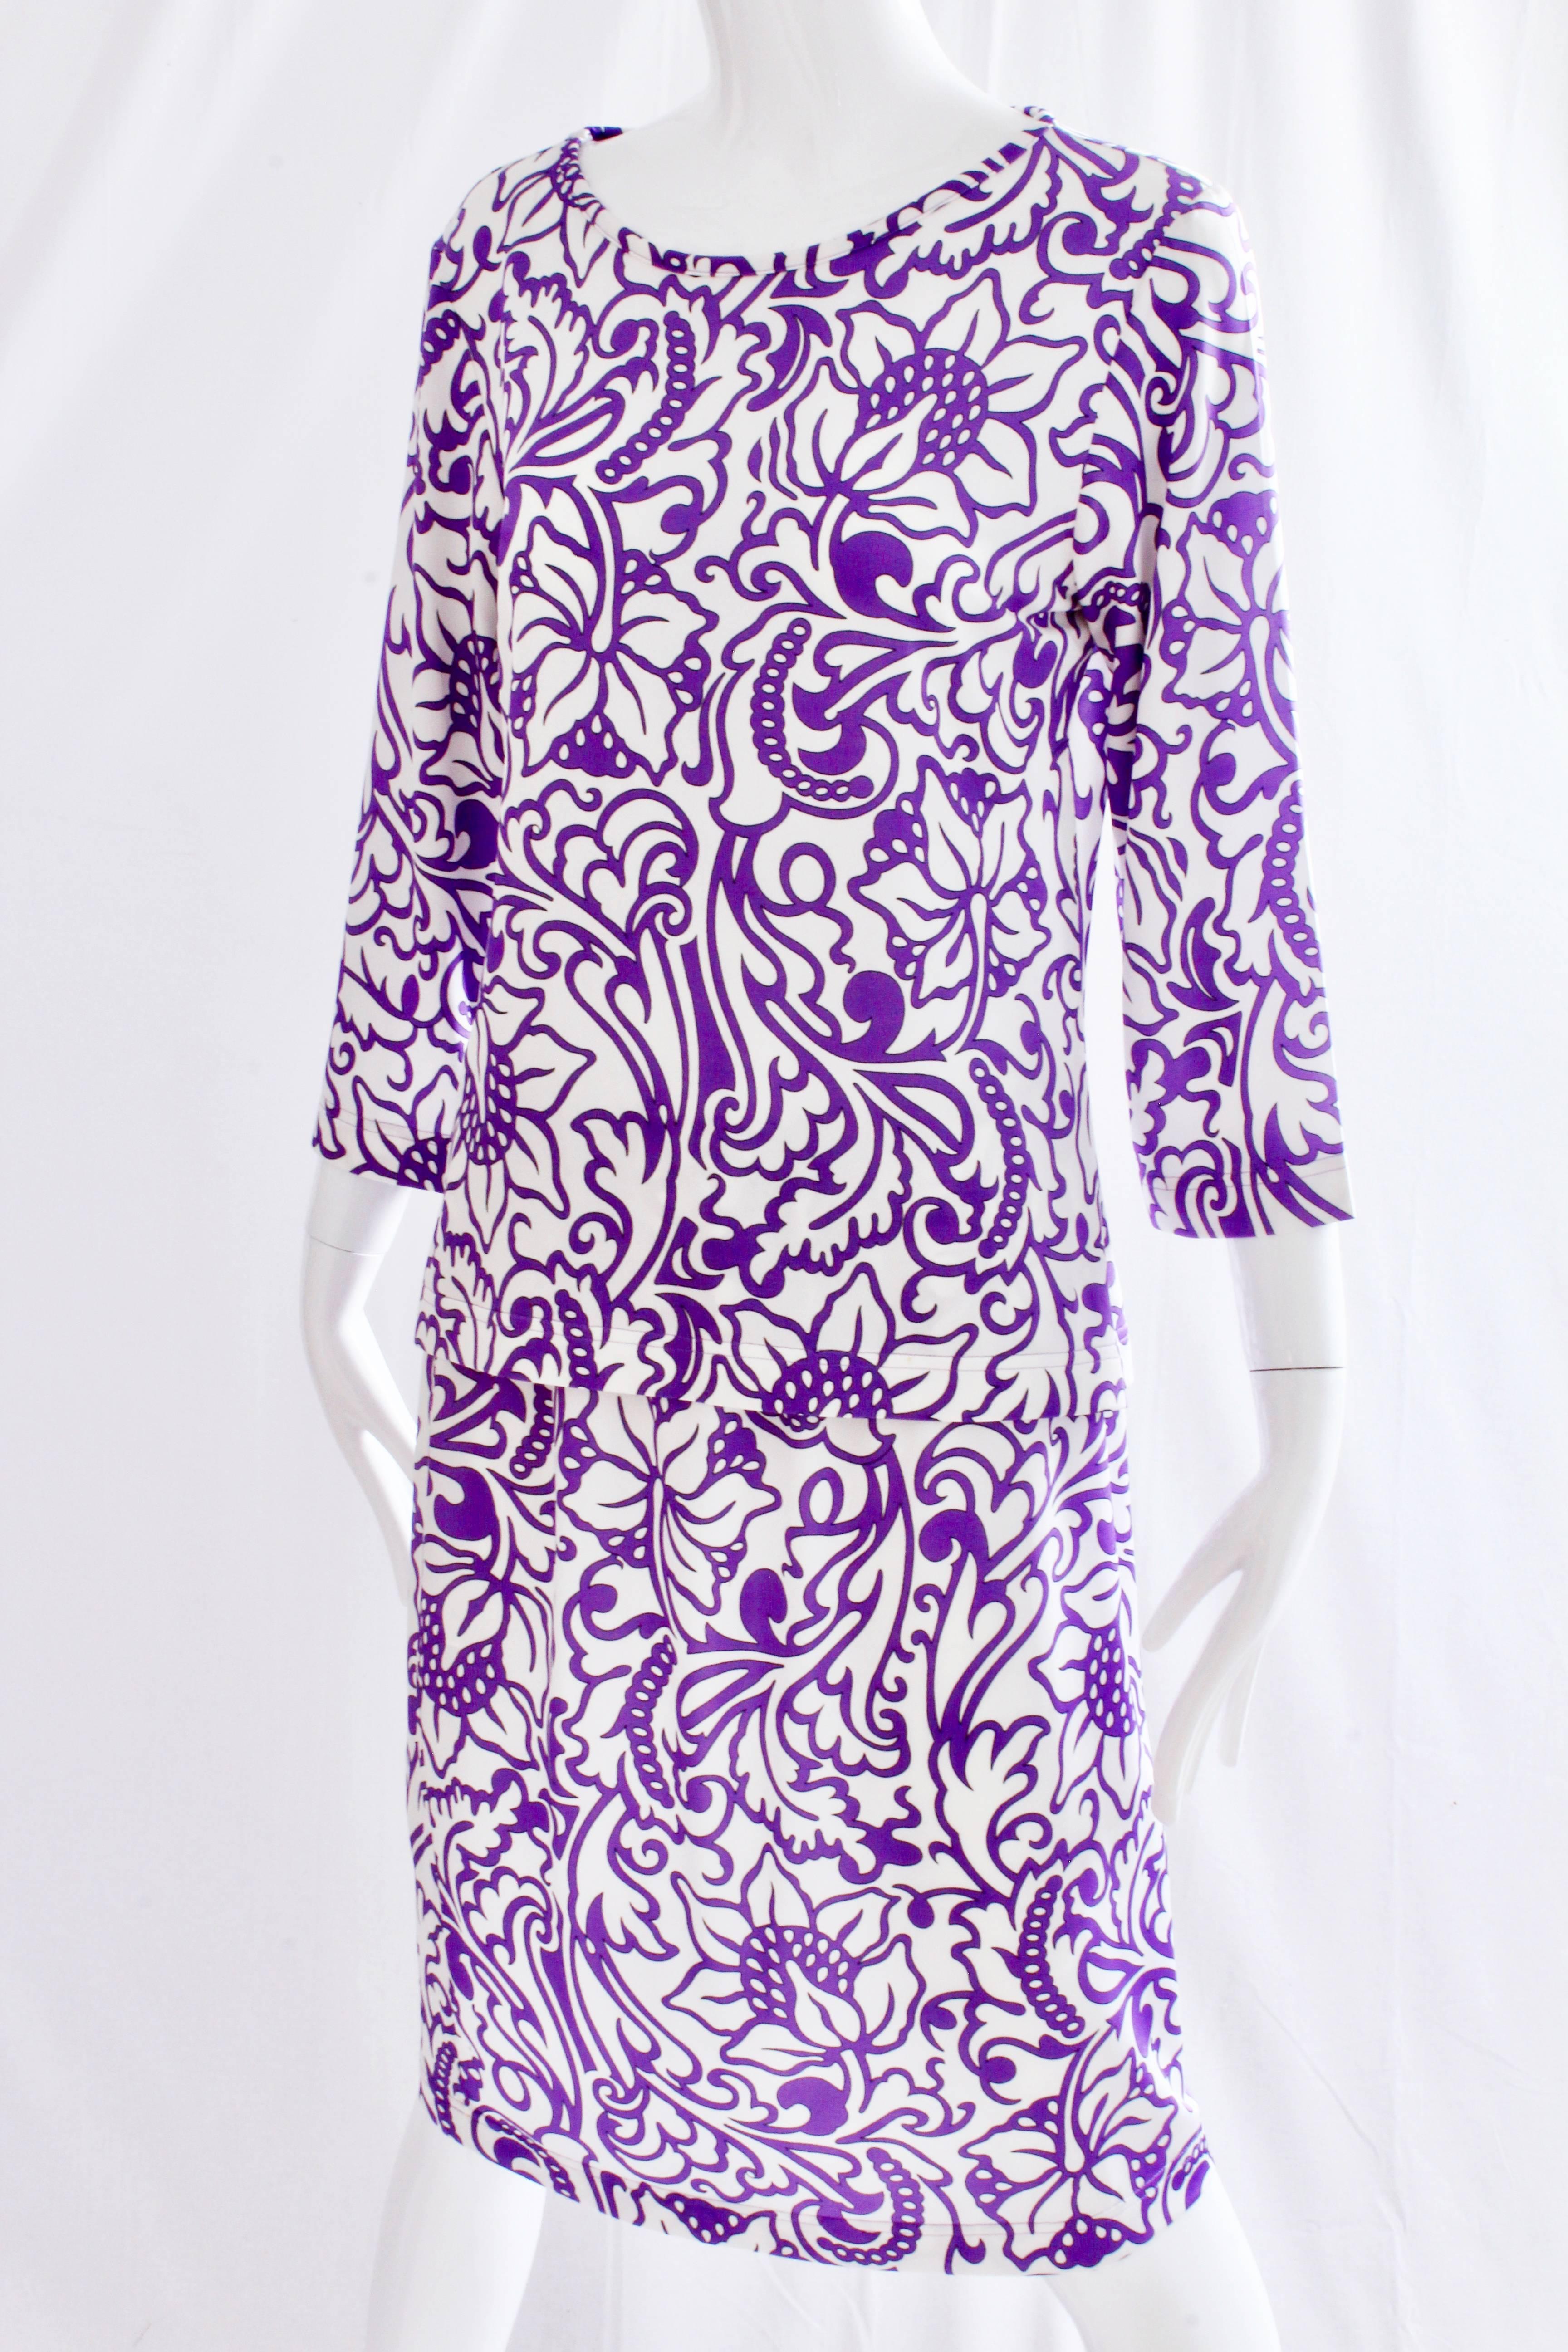 Gray Averardo Bessi Blouse & Skirt Suit 2pc Purple White Floral Abstract Italy 12/10